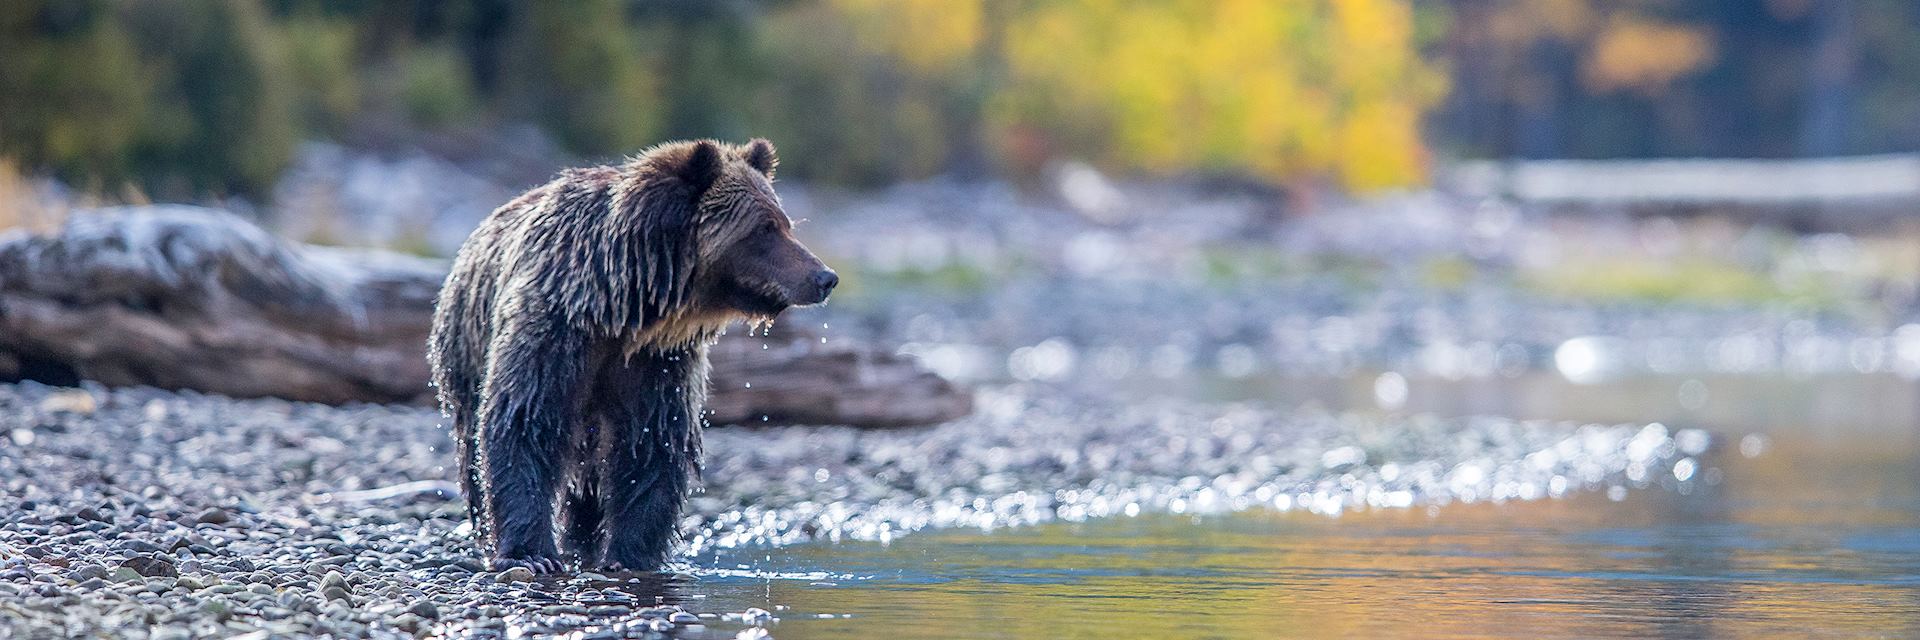 Grizzly in the Chilko River, BC